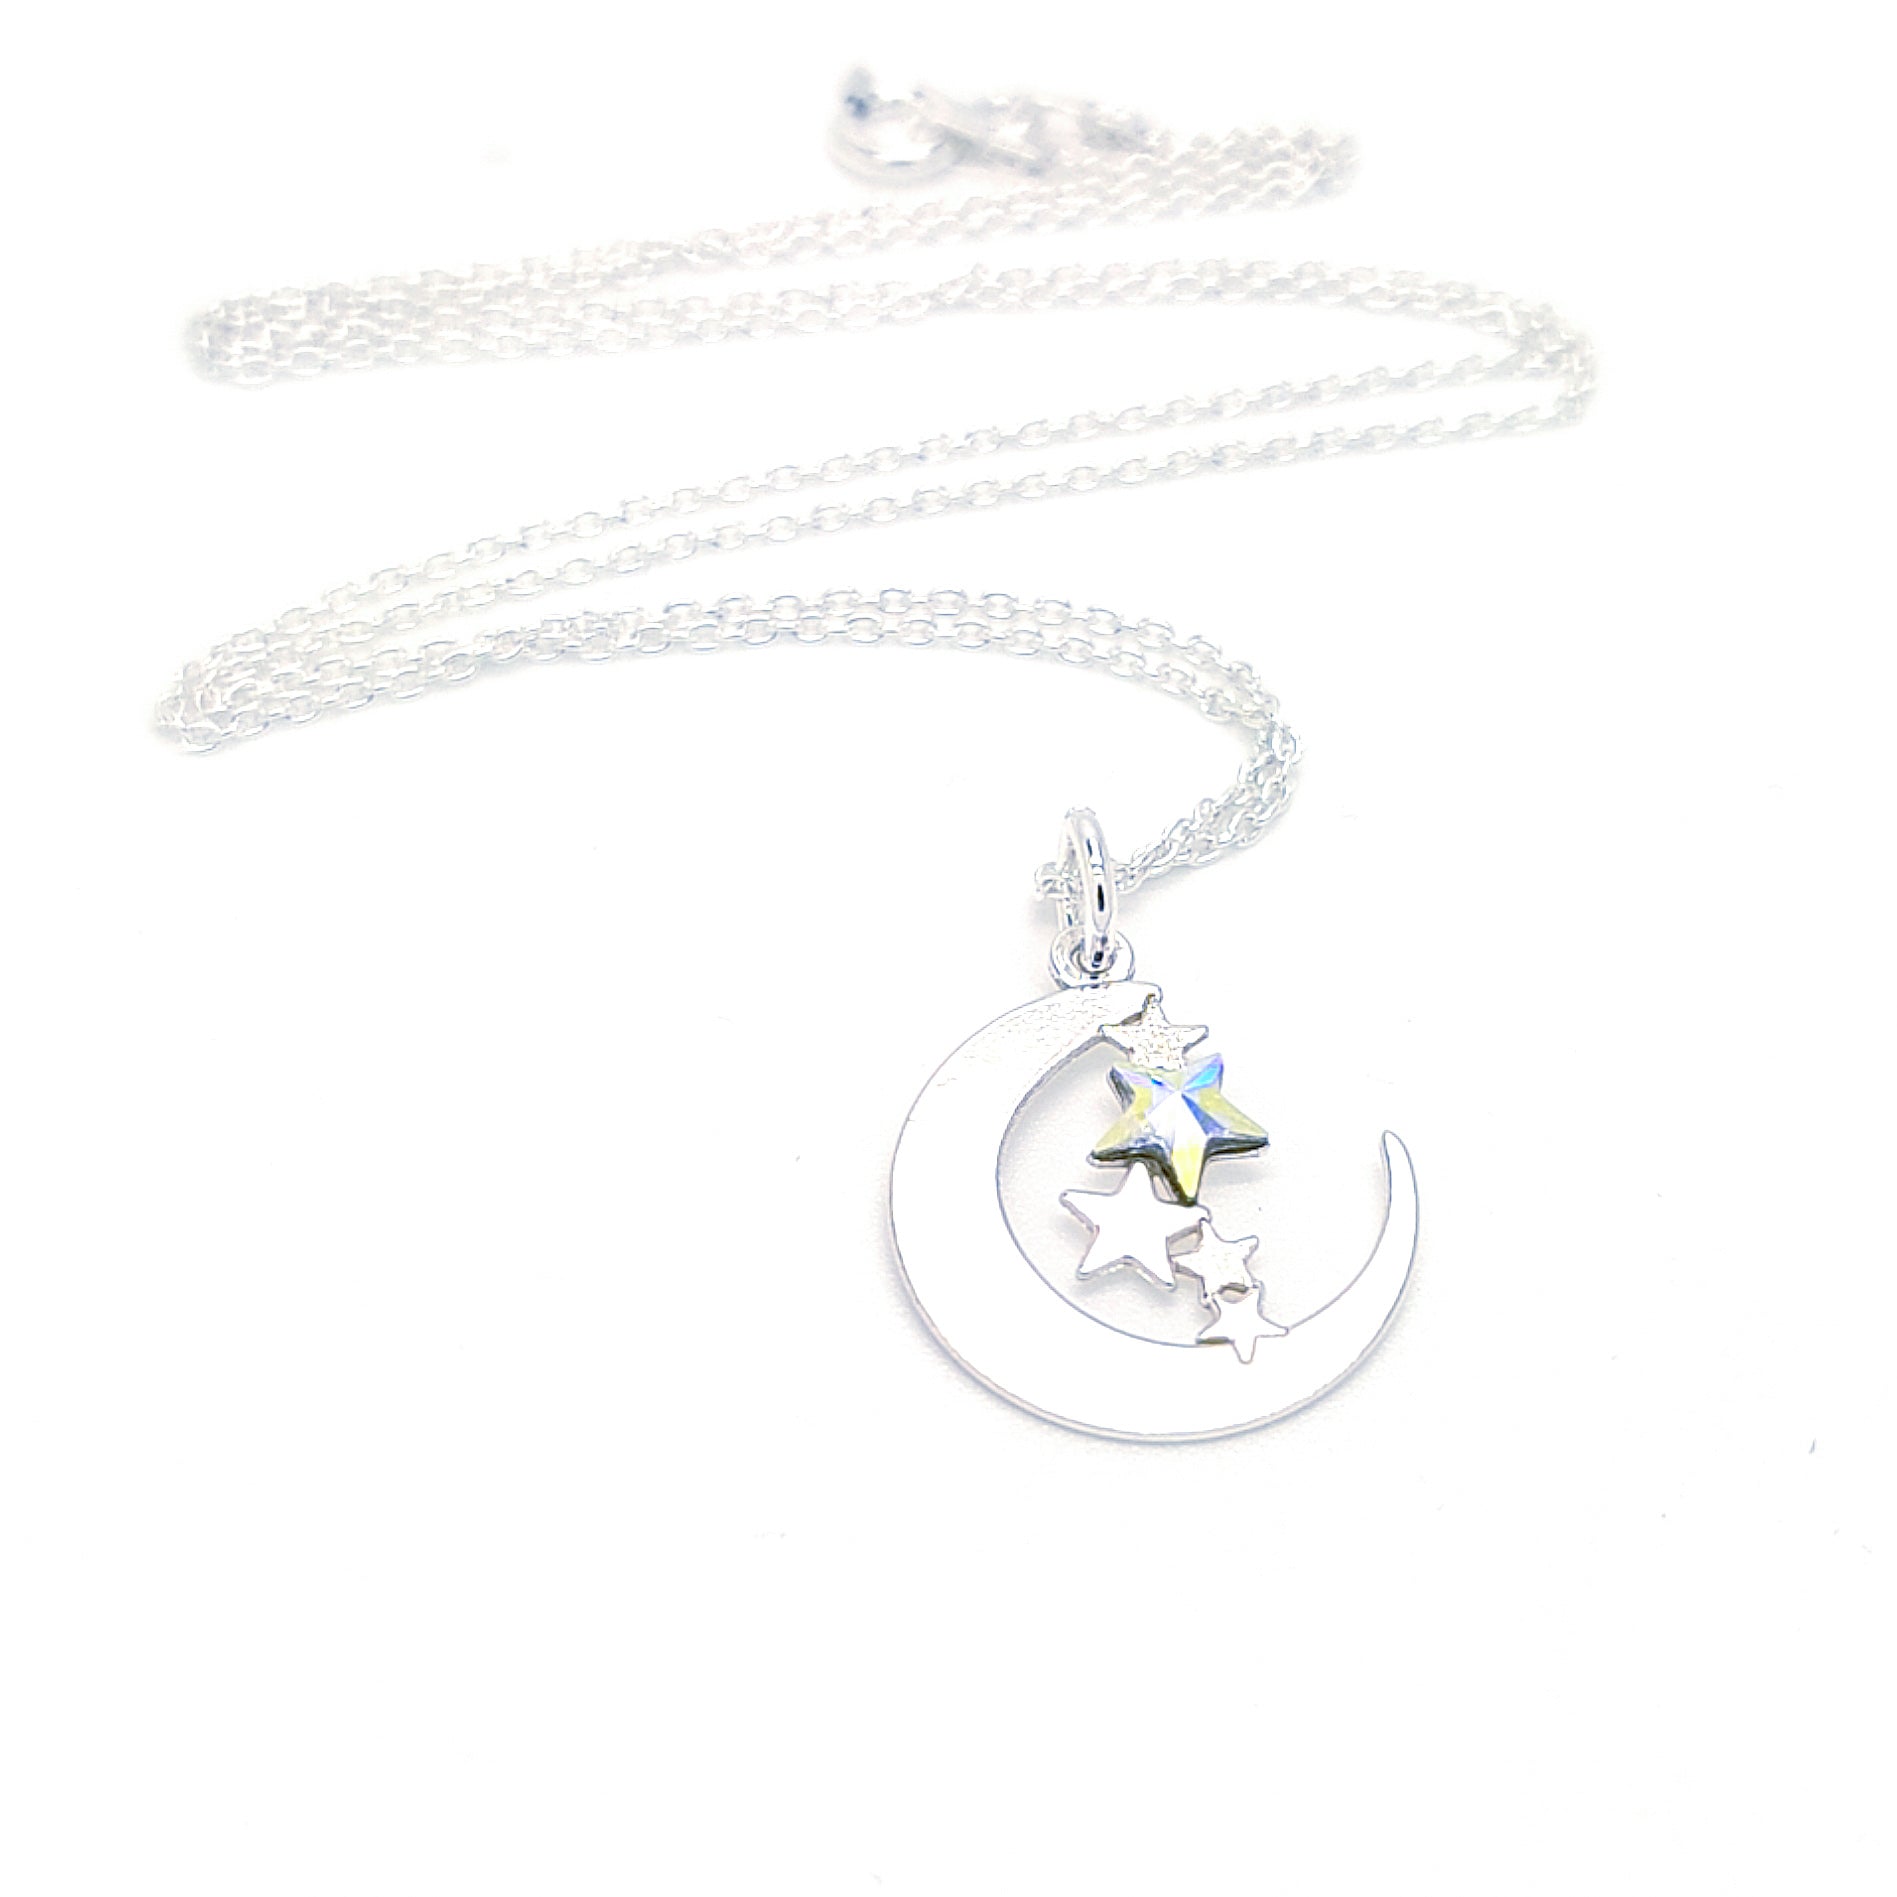 Sterling silver necklace with crescent moon and stars pendant on fine chain made in Ireland